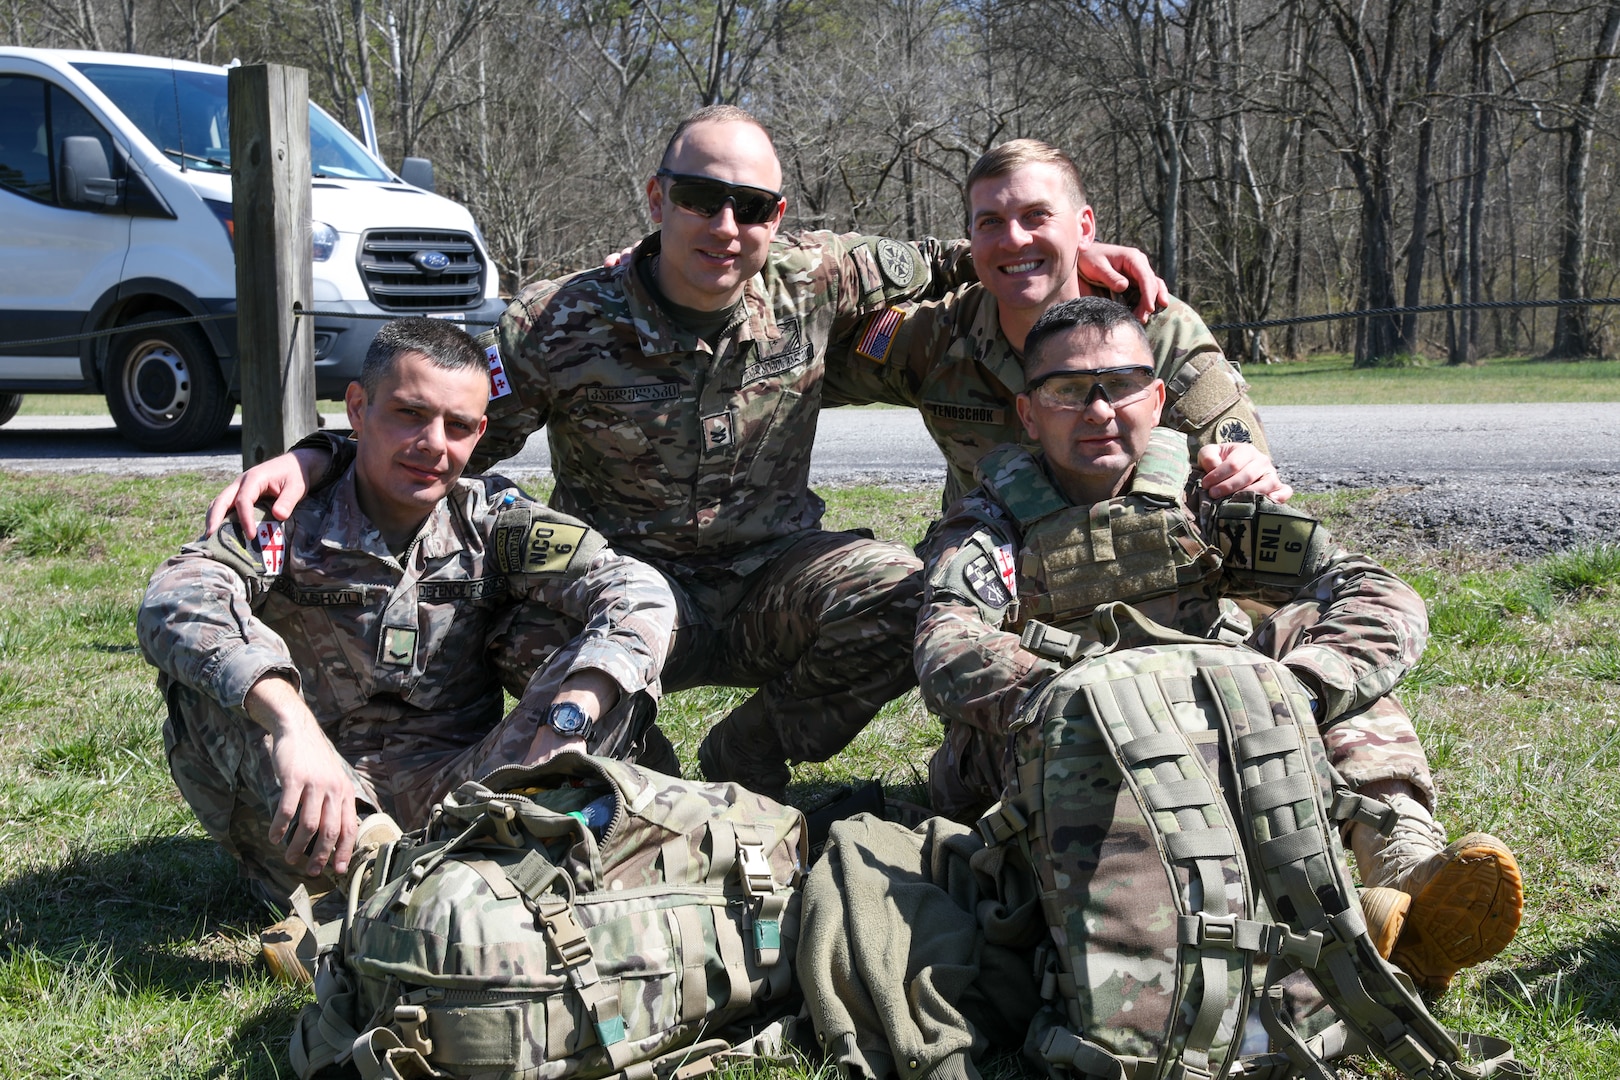 Georgia Defense Force Junior Sergeant Paata Sabiashvili, front left, an infantryman representing the 1st Infantry Brigade; Georgia Defense Force Corporal-Specialist Irakli Nozadze, front right, a cannon crewmember representing the 5th Artillery Brigade; 1st Sgt. Sergo Kandelaki, back left, executive assistant to the Georgia Defense Force Command Sergeant Major, Georgia Defense Force General Staff; and Staff Sgt. Michael Tenoshcok, back right, Joint Operation Center noncommissioned officer, Joint Force Headquarters, Georgia National Guard; pose for a photo during the 2024 Georgia Army National Guard State Best Warrior Competition at the Catoosa Volunteer Training Site, Ringgold, Georgia, March 12, 2024.